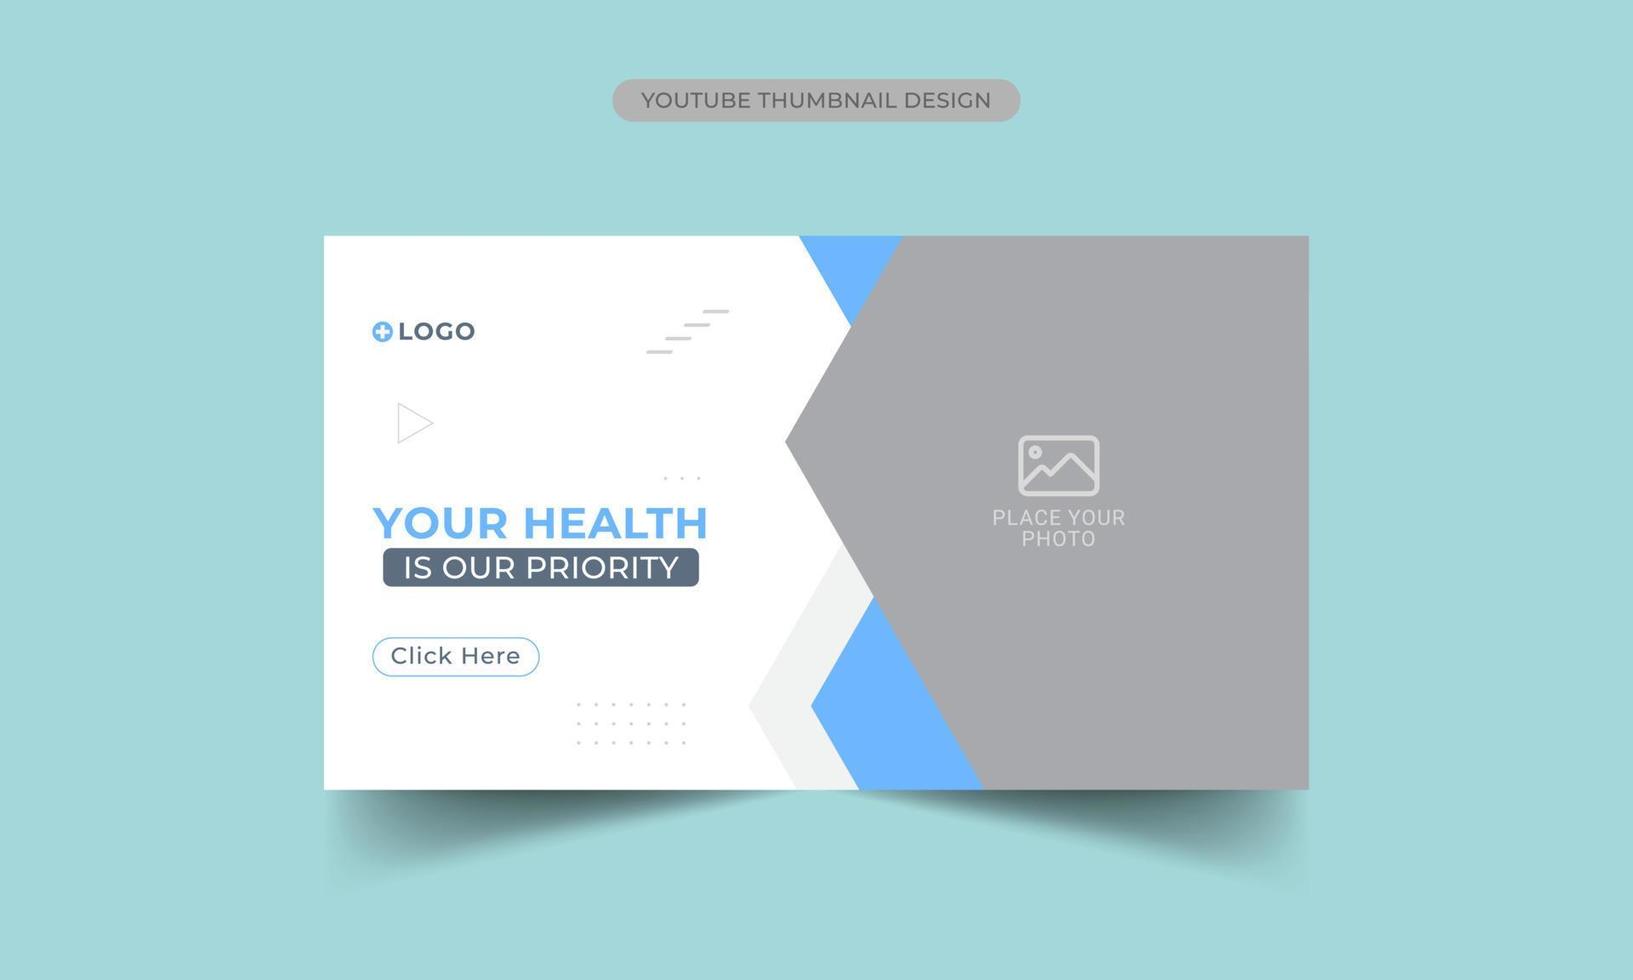 Medical health and fitness training youtube thumbnail vector template design